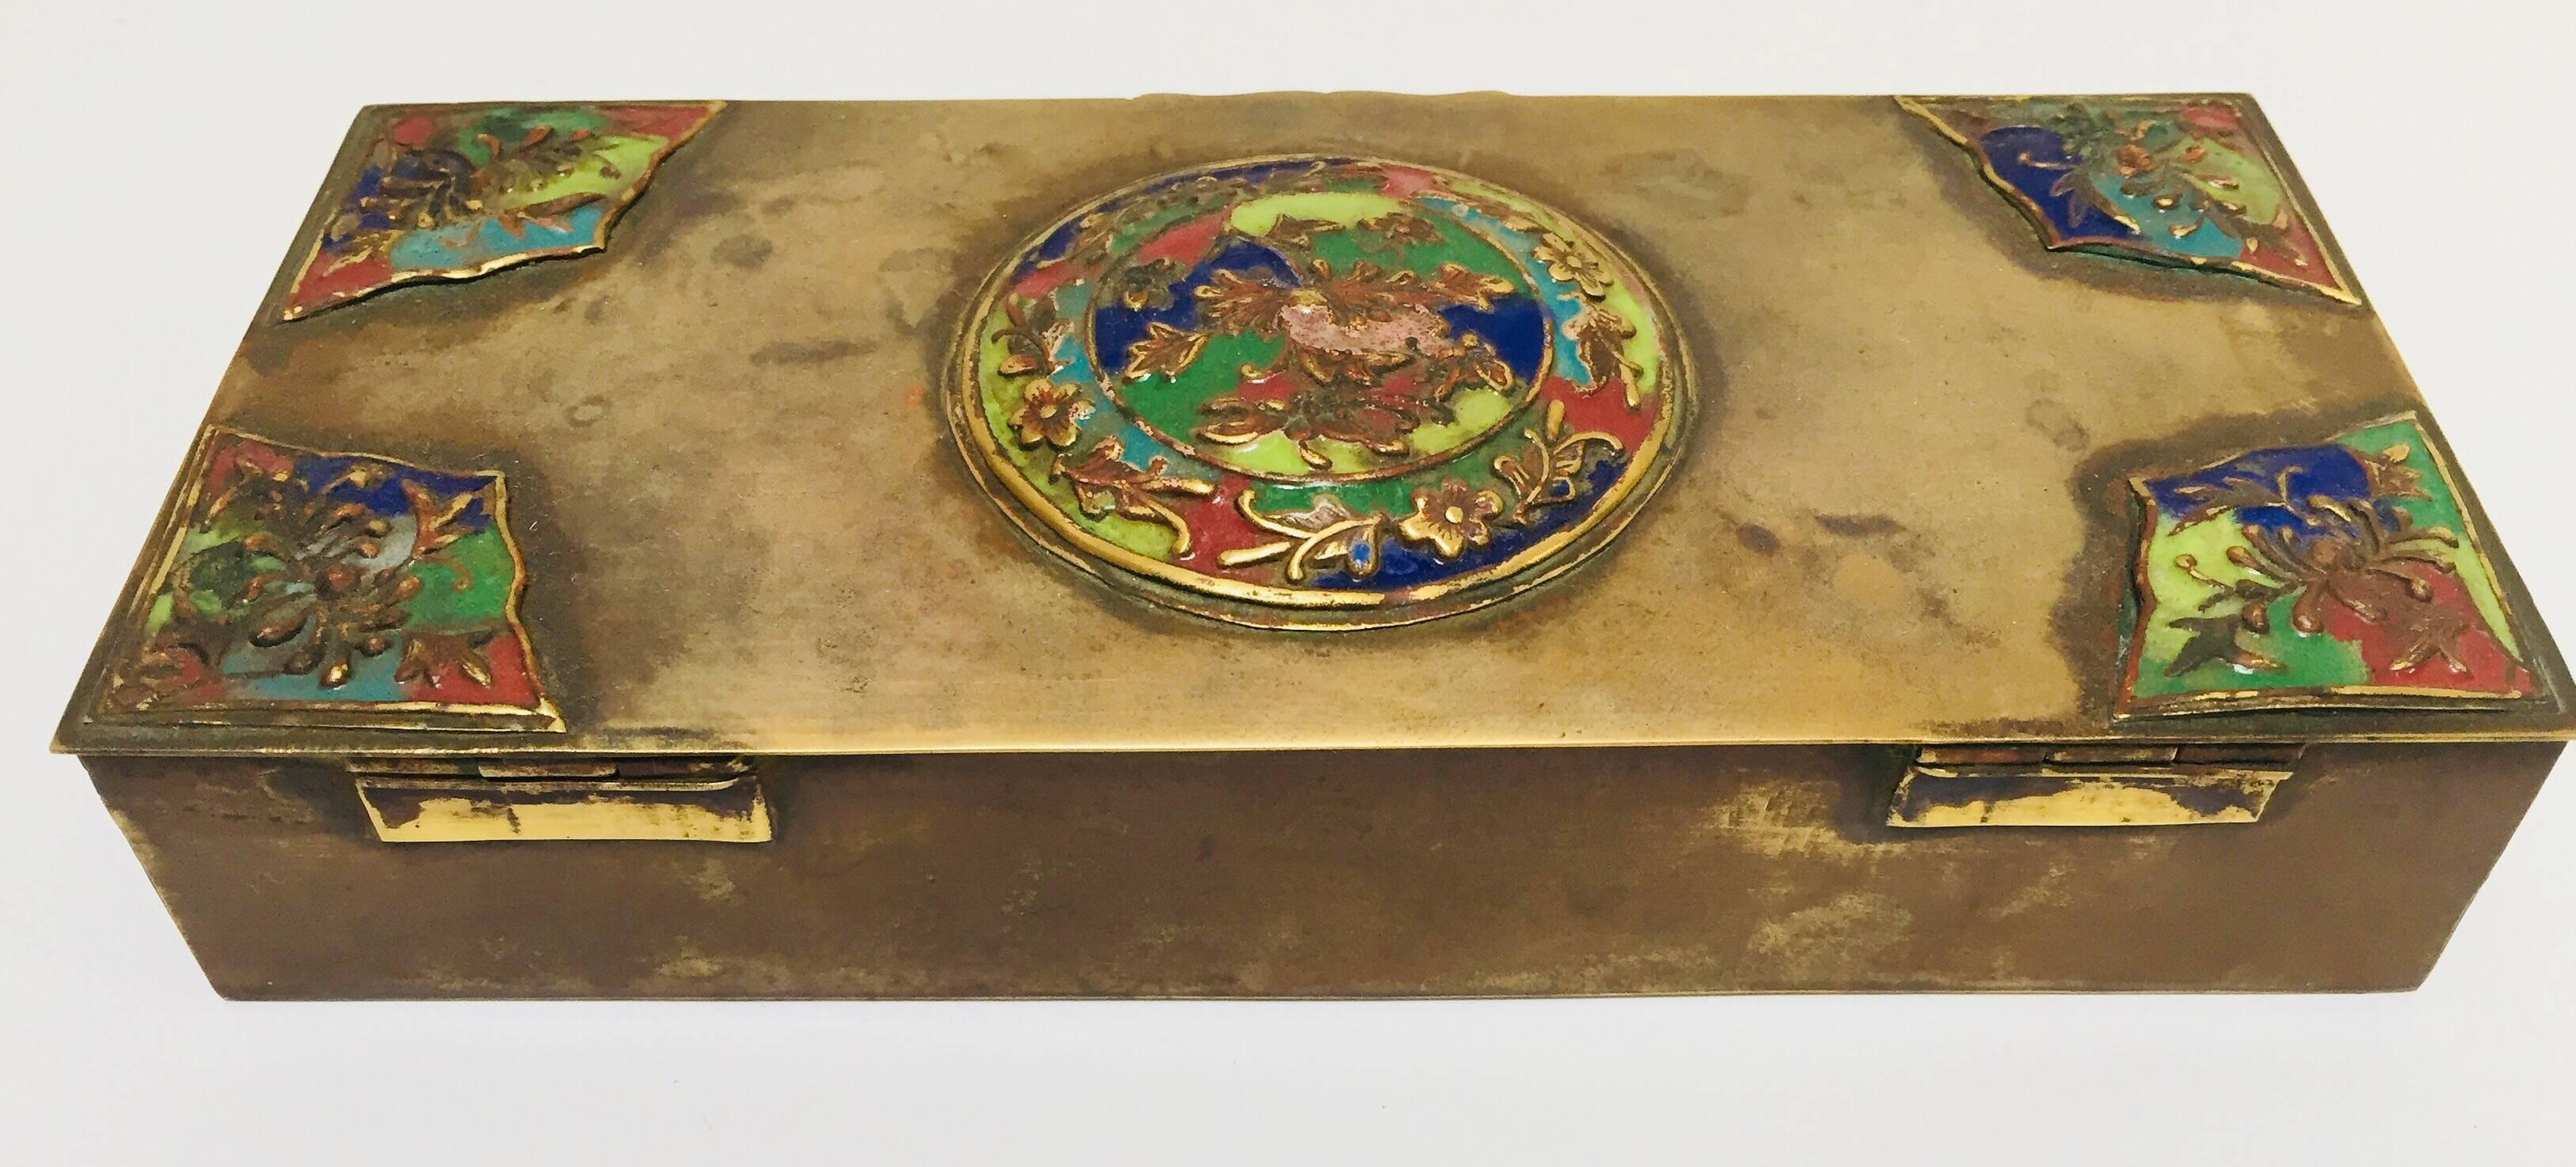 Brass Art Deco Lidded Box with Enameled Decoration 1